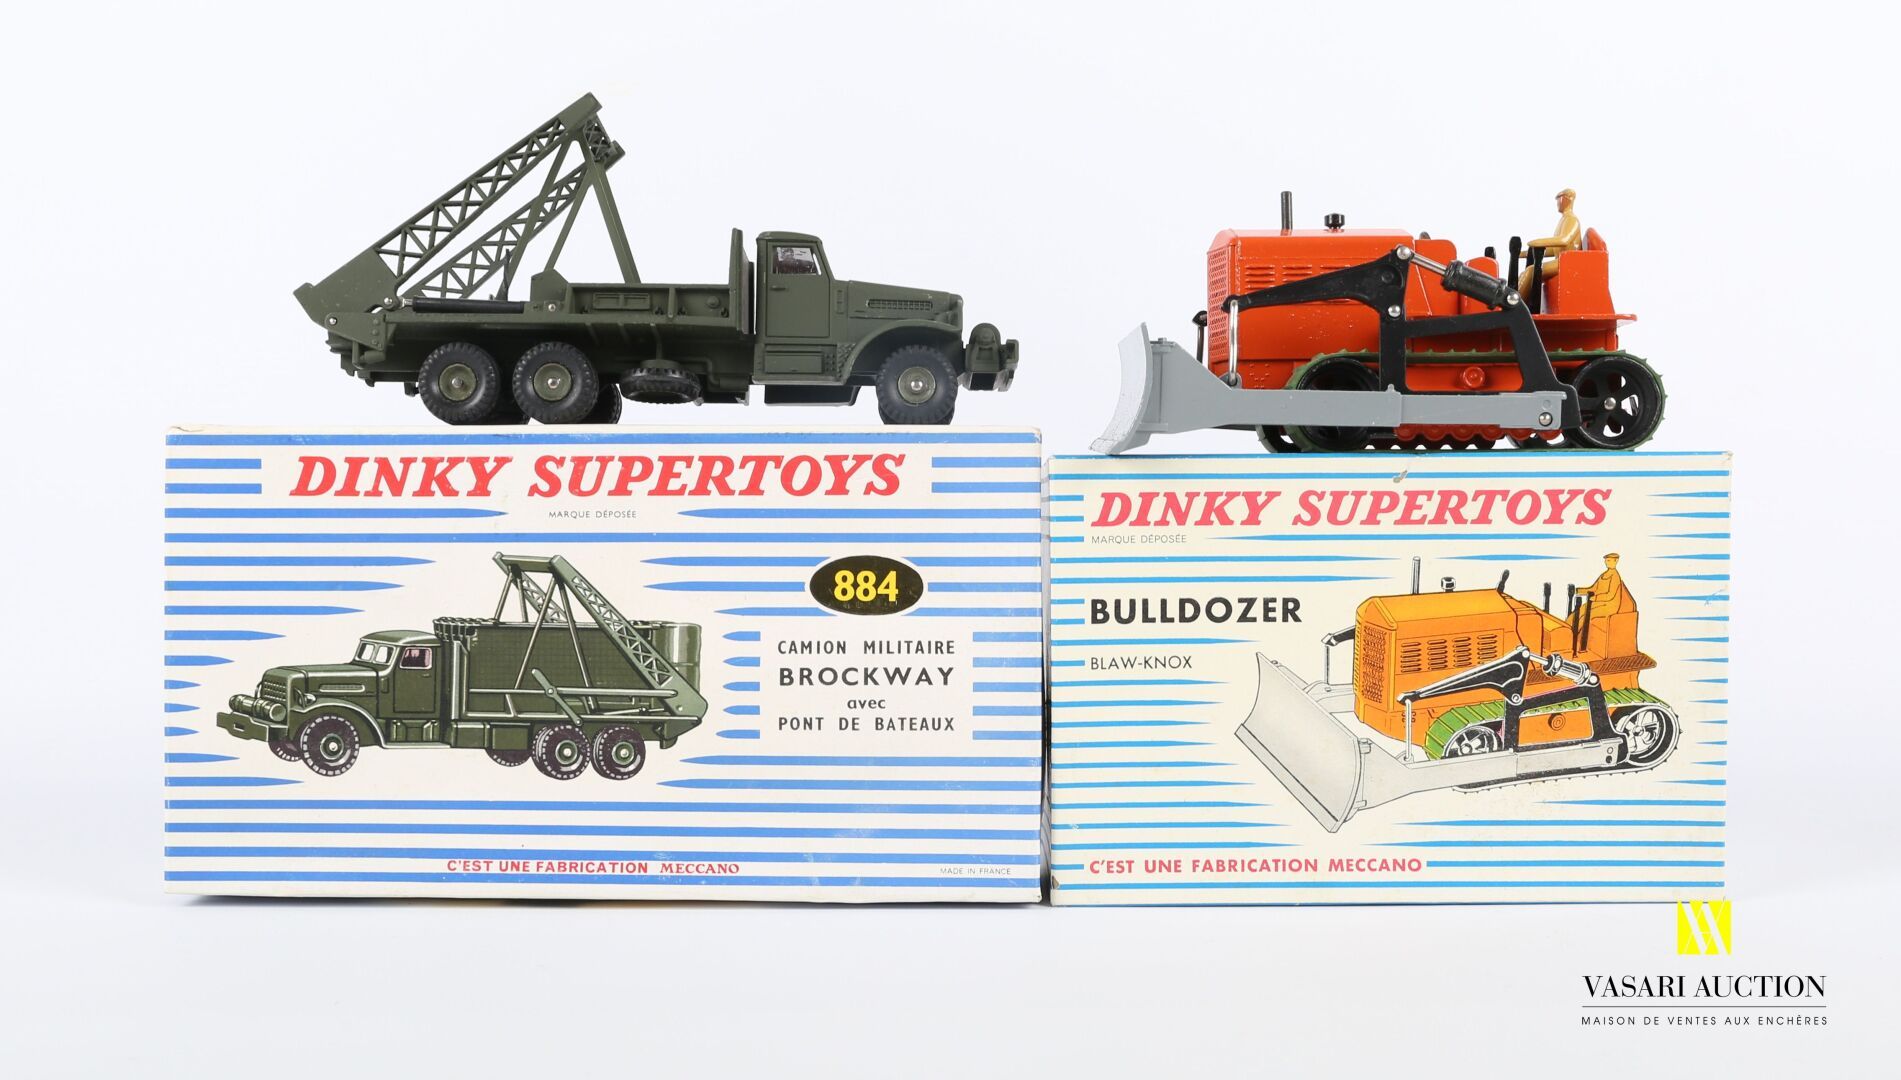 Null DINKY SUPERTOYS (FRANCE MECCANO)

Military brockway truck with boat deck 88&hellip;